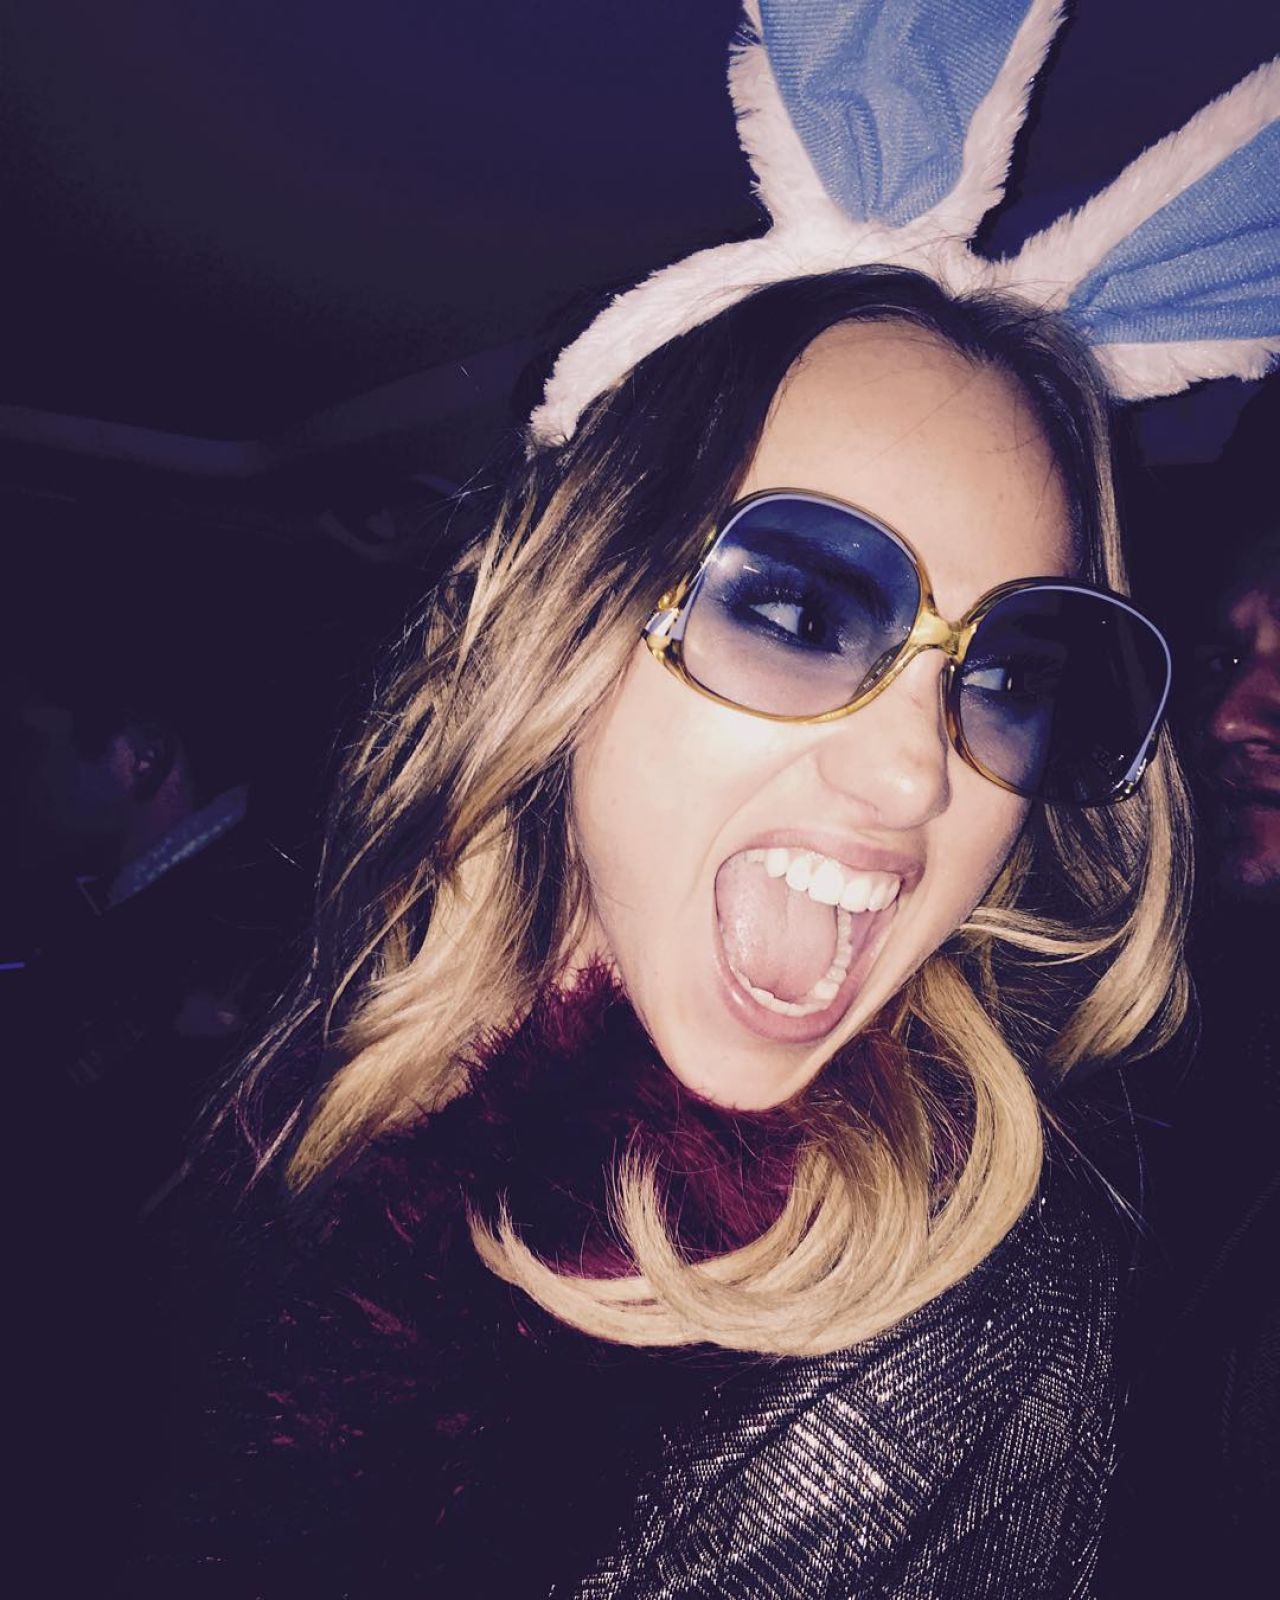 Suki Waterhouse with mouth open and bunny ears